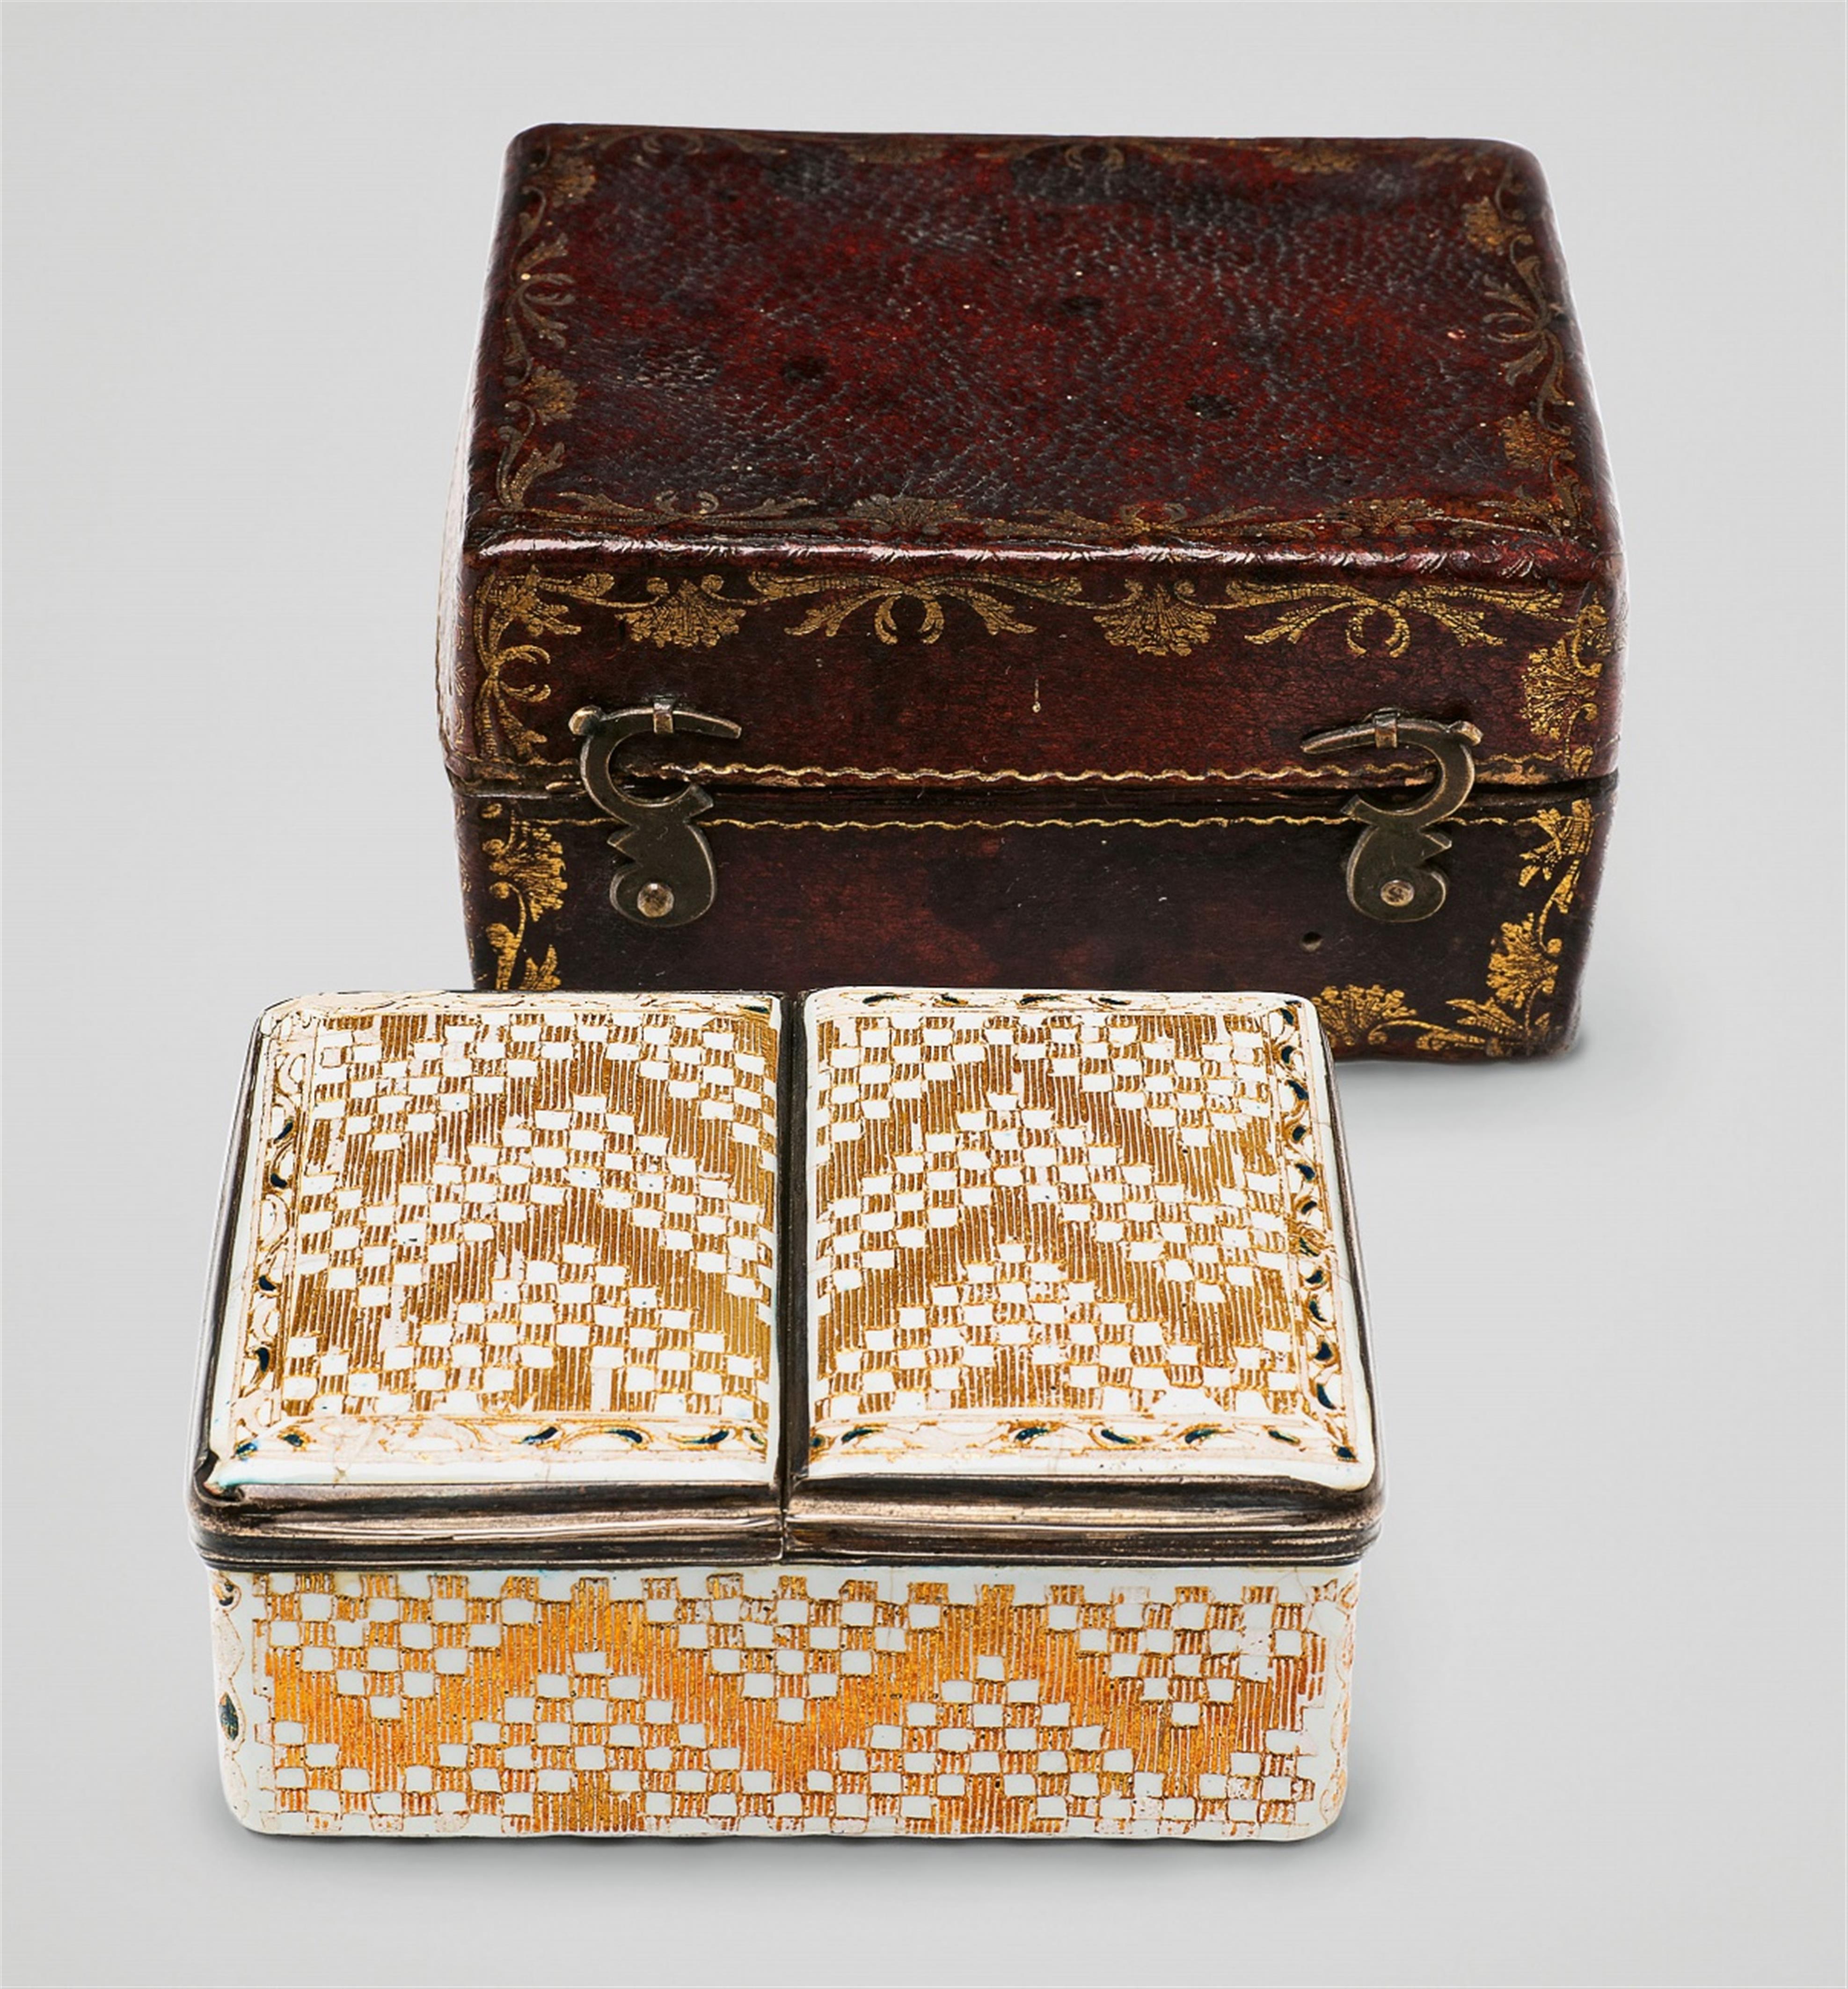 A rare gilt enamel double box in a leather case - image-1